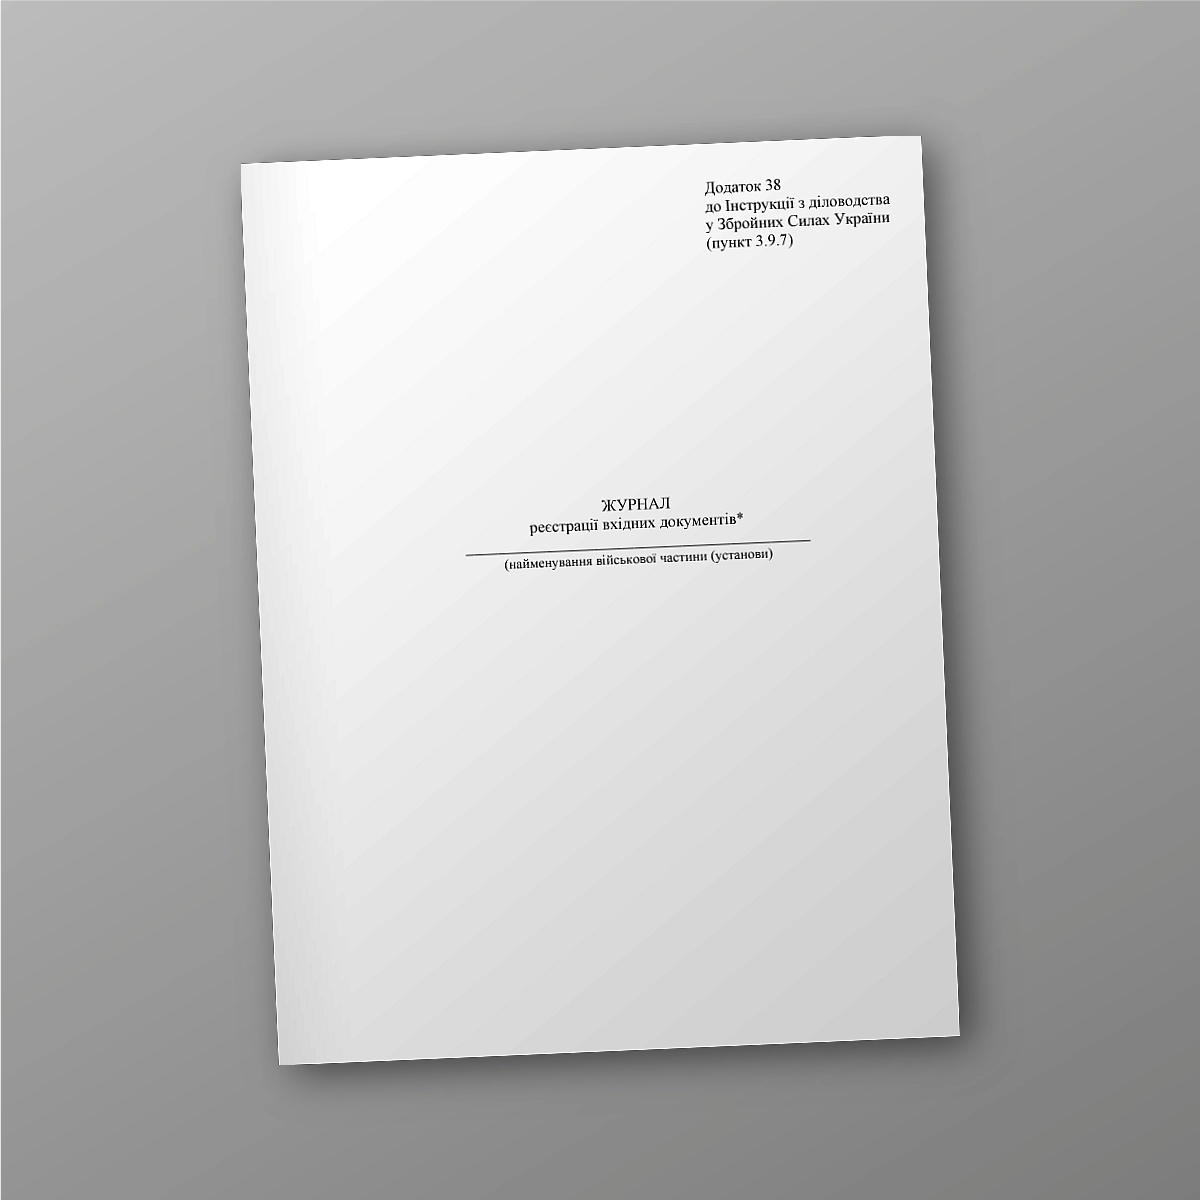 Journal of registration of incoming documents | PrintTo: